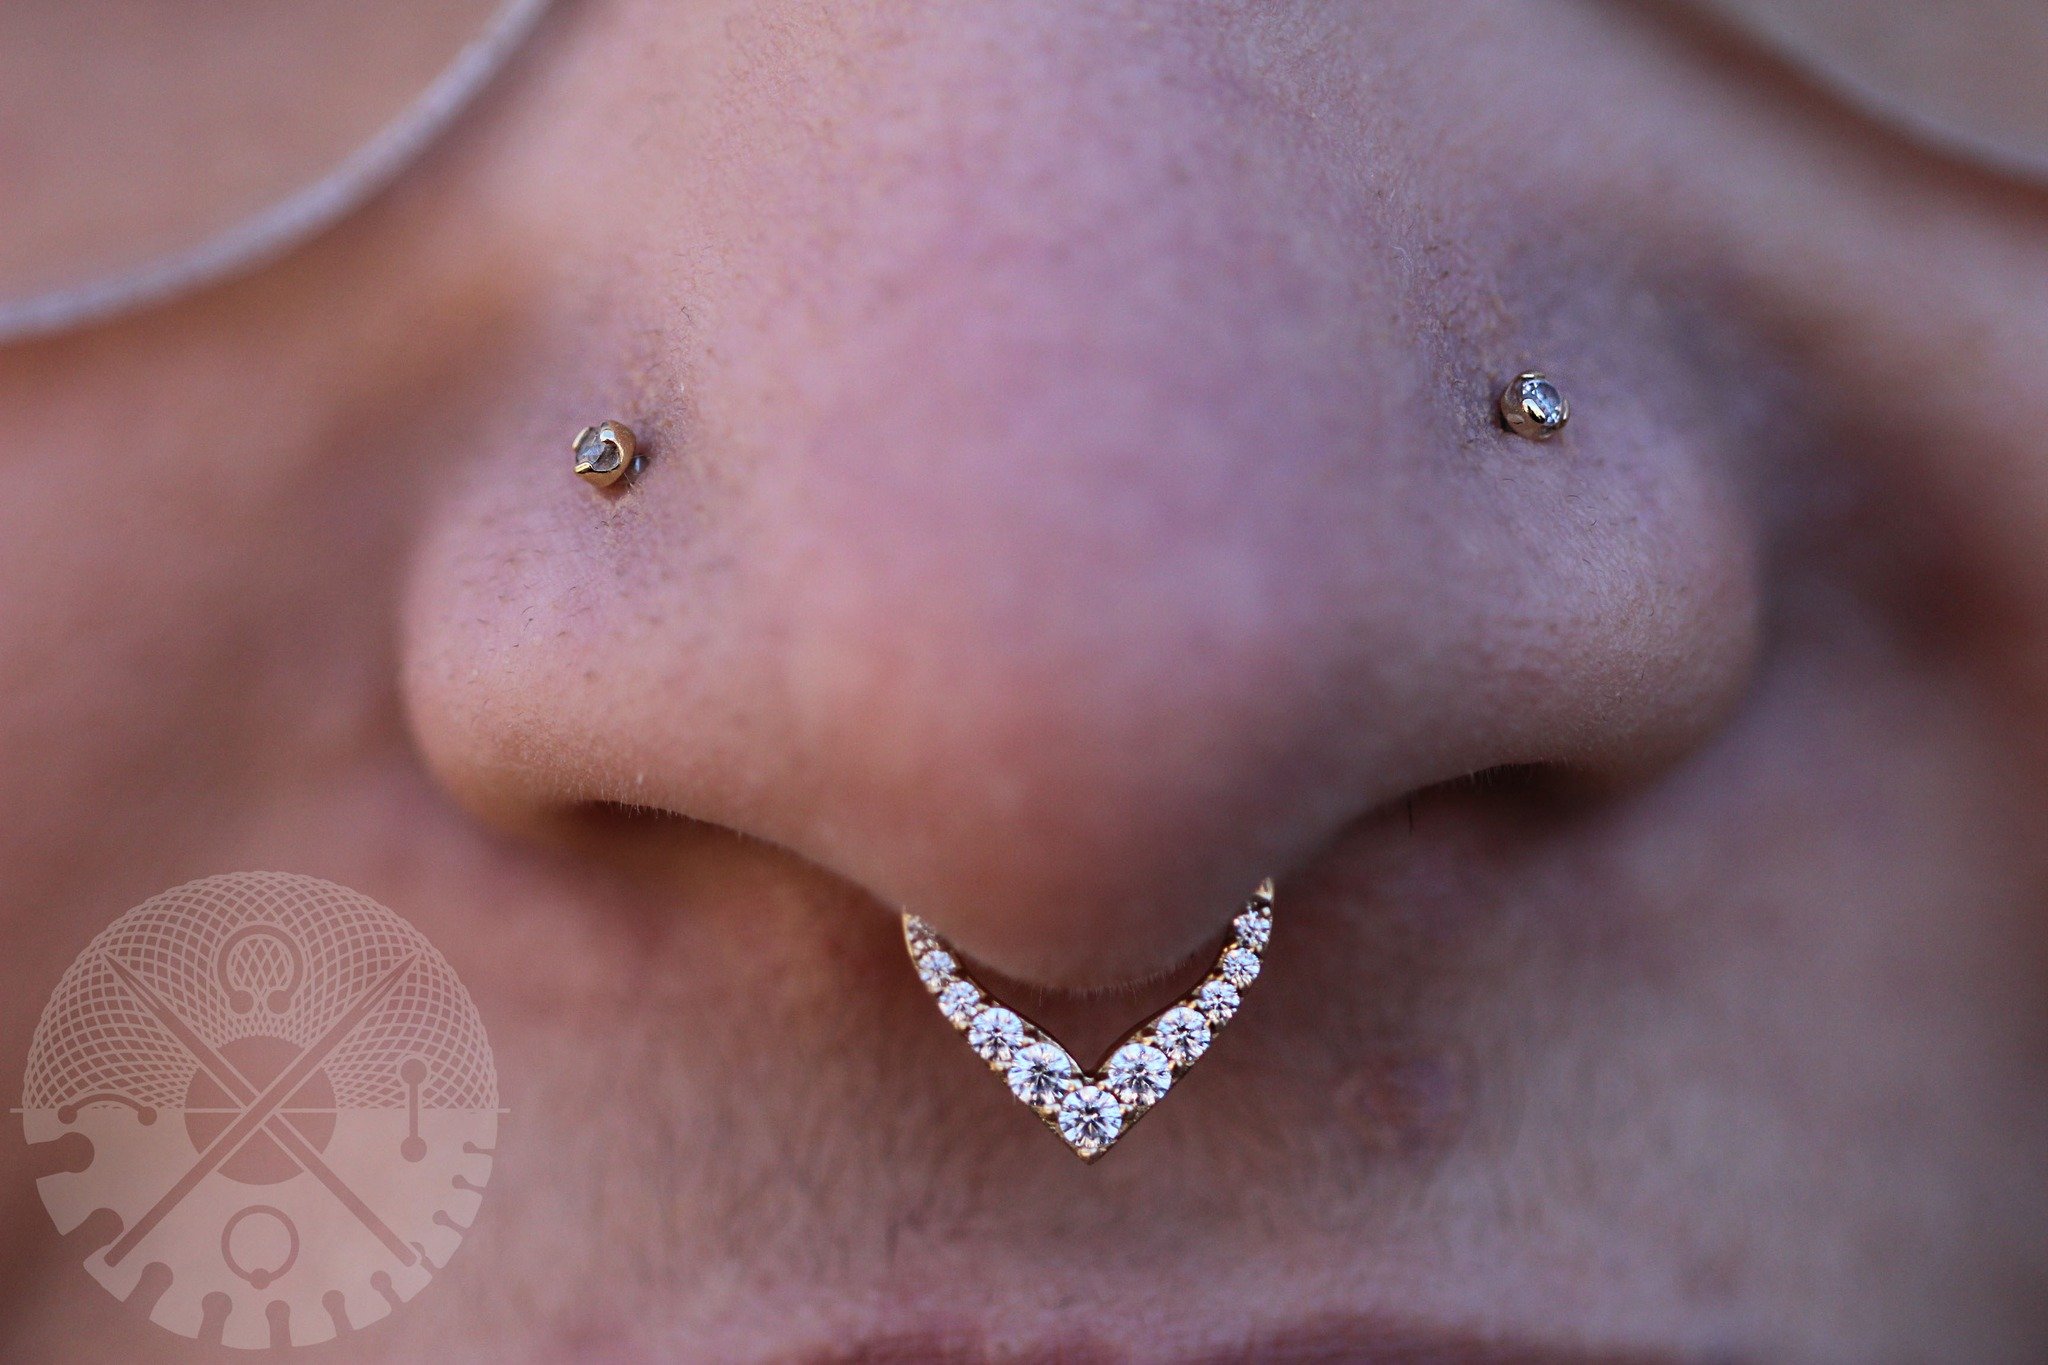 We love to see a nose just shine! The RISE &amp; SHINE from @buddhajewelryofficial 

Good Life is appointment only for all services, consultations and even just to browse our jewelry selection. We are available for appointments through our online boo